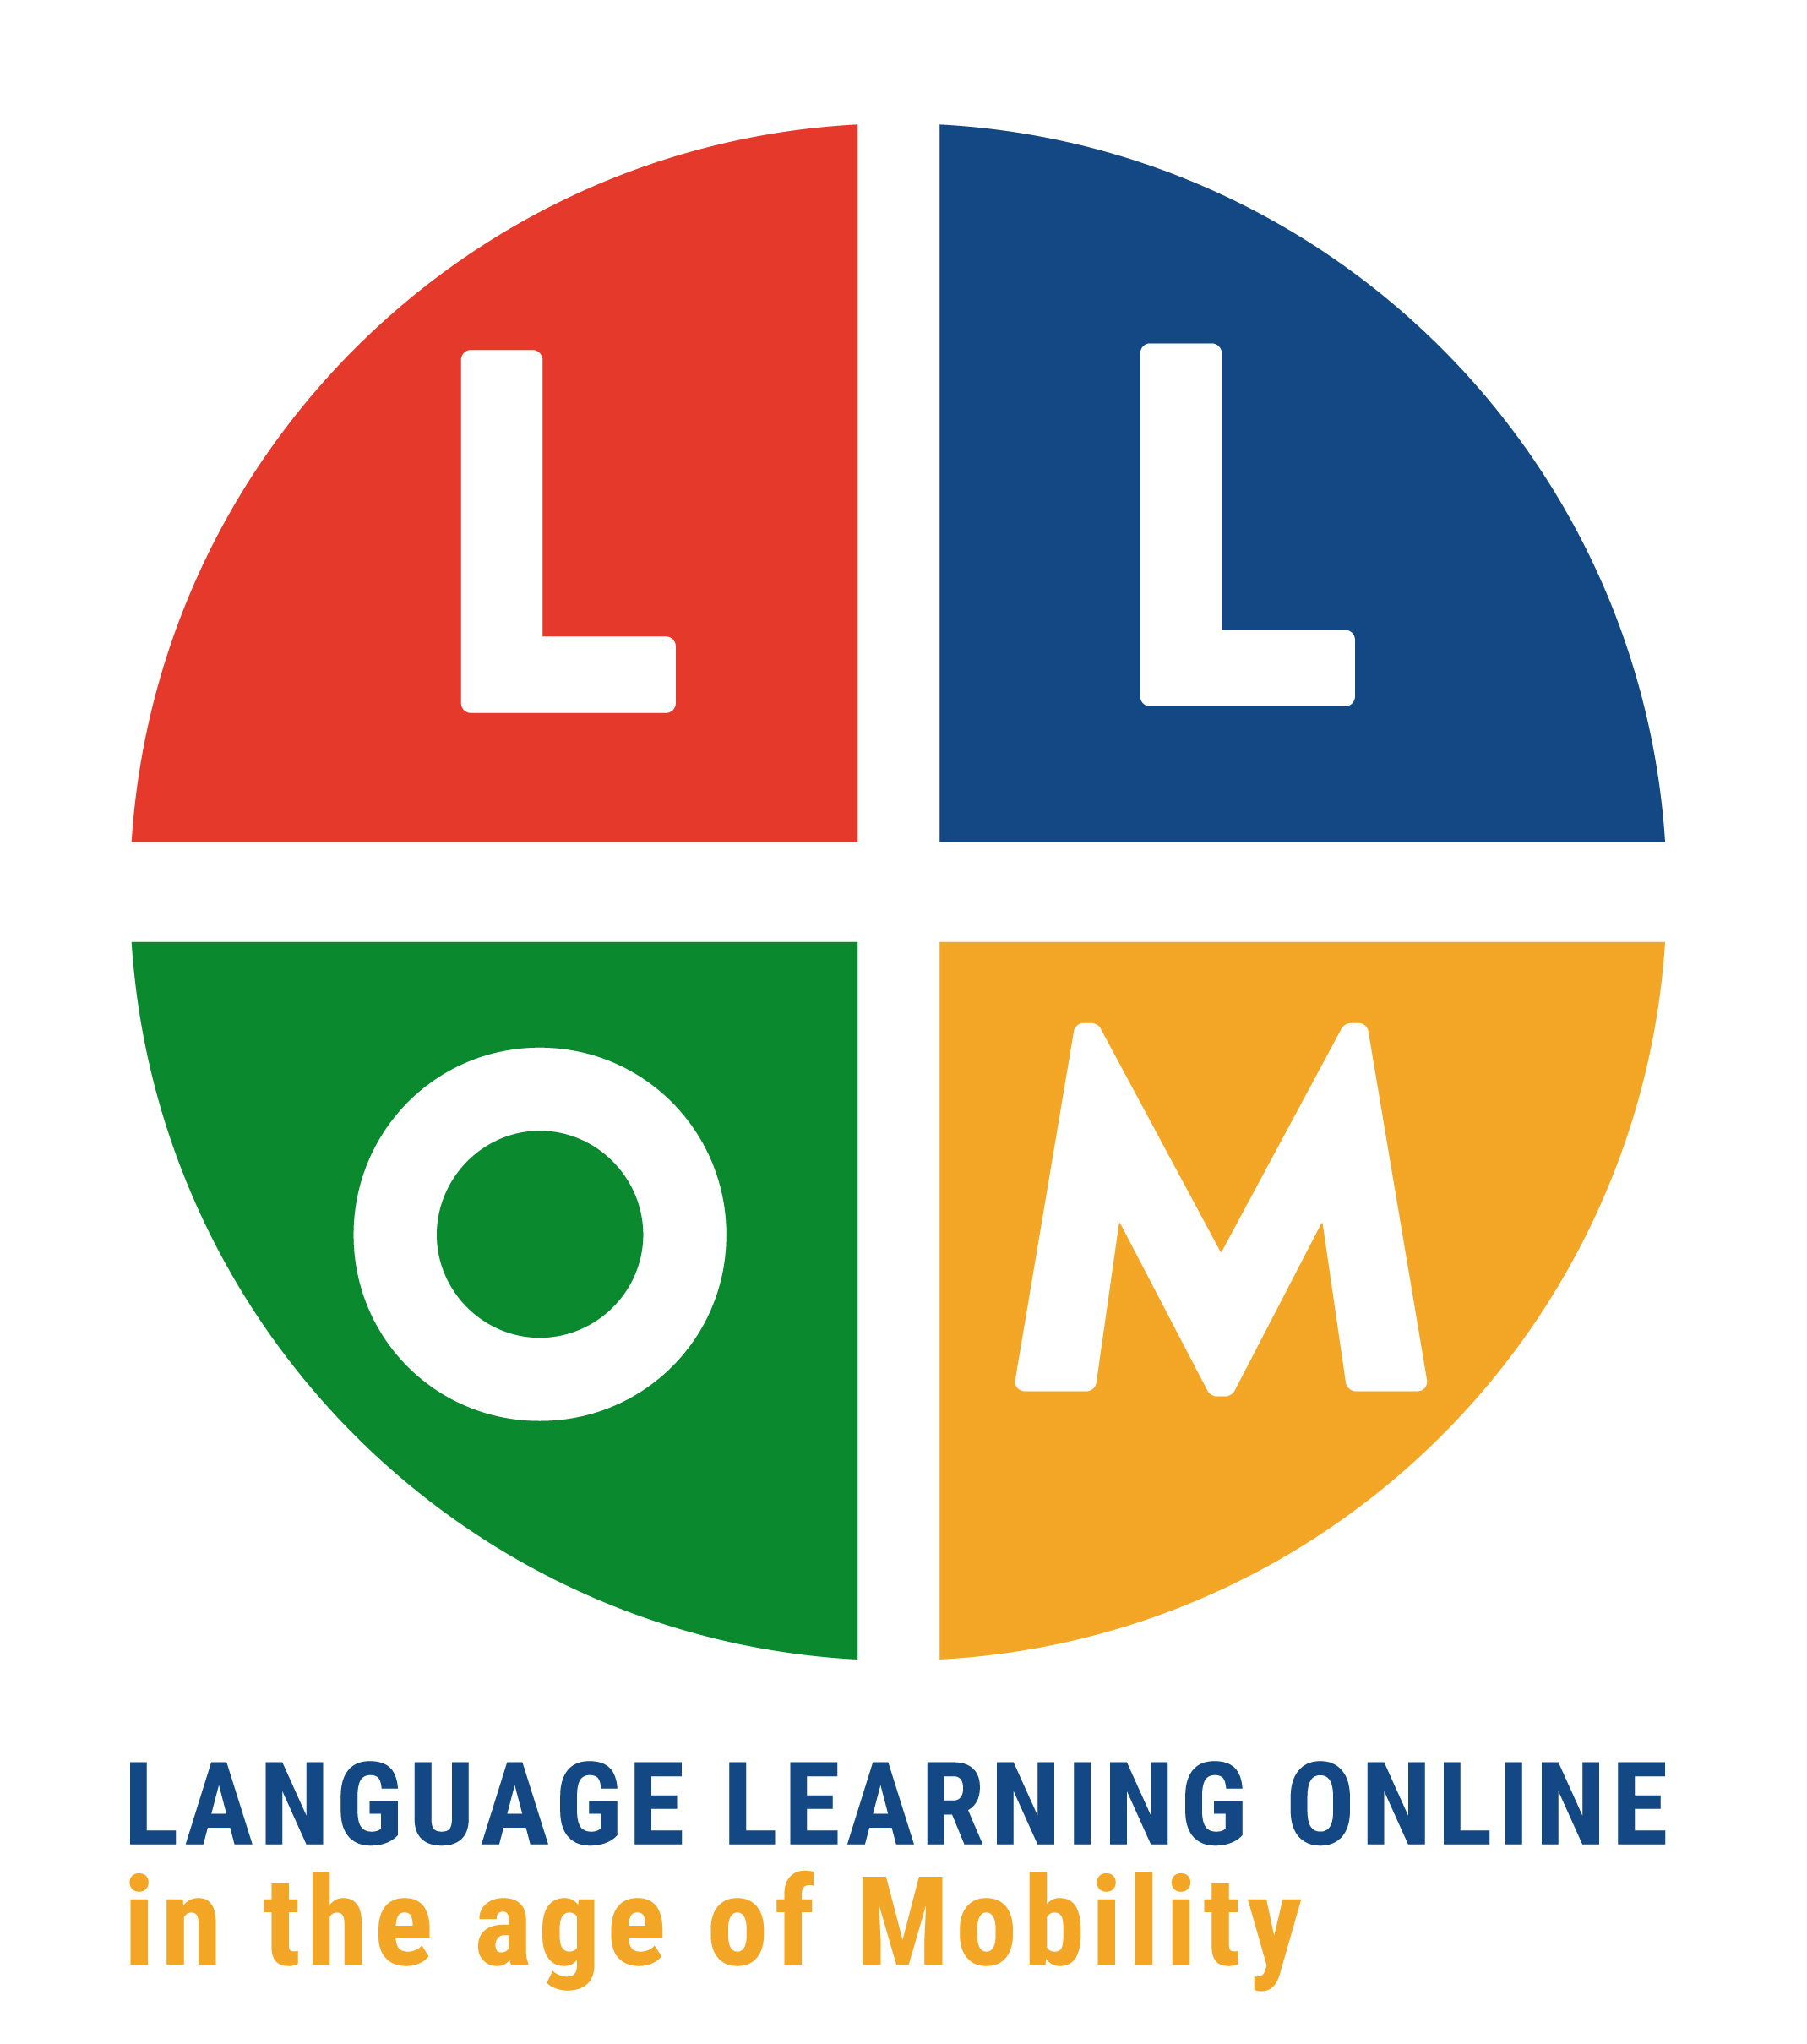 LLOM - Language Learning Online in the age of Mobility